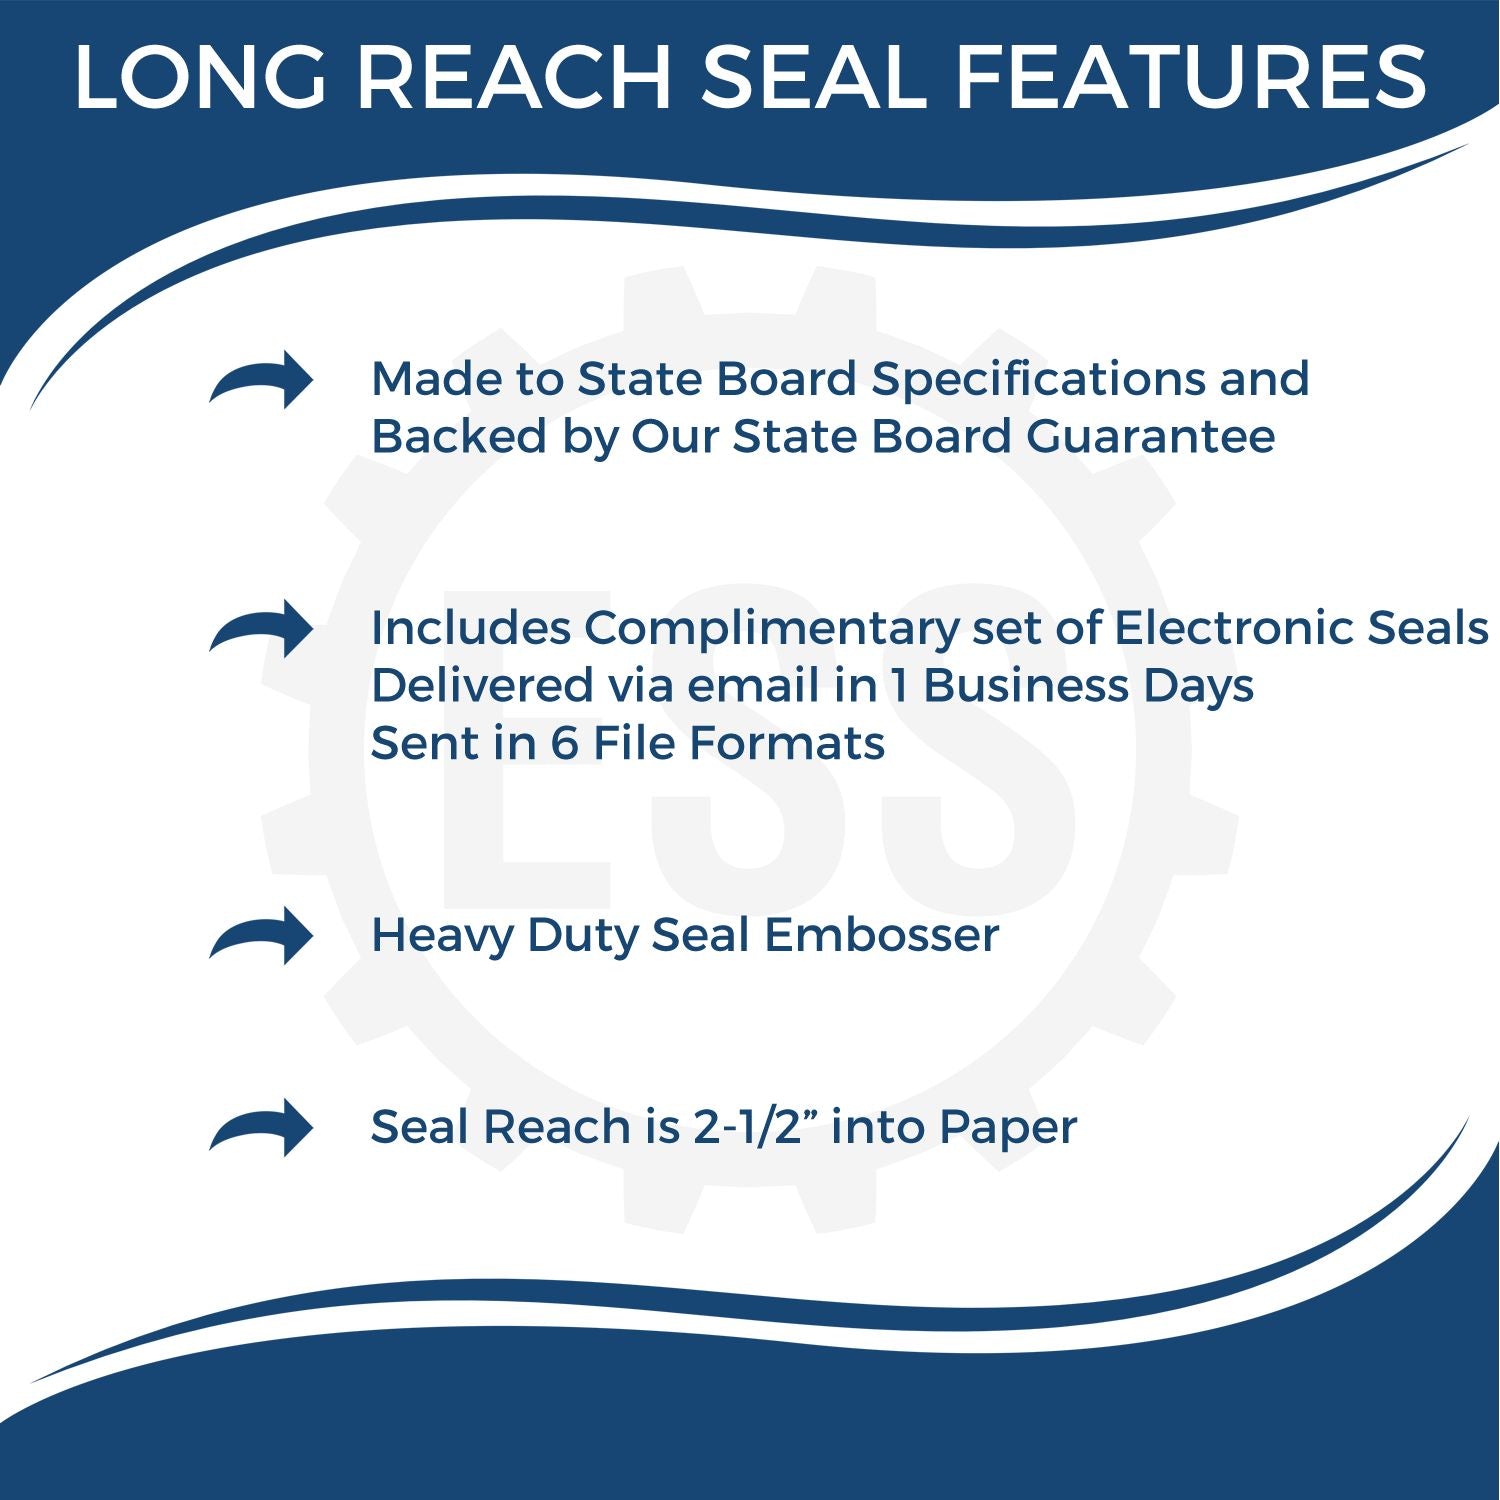 The main image for the Long Reach Indiana PE Seal depicting a sample of the imprint and electronic files